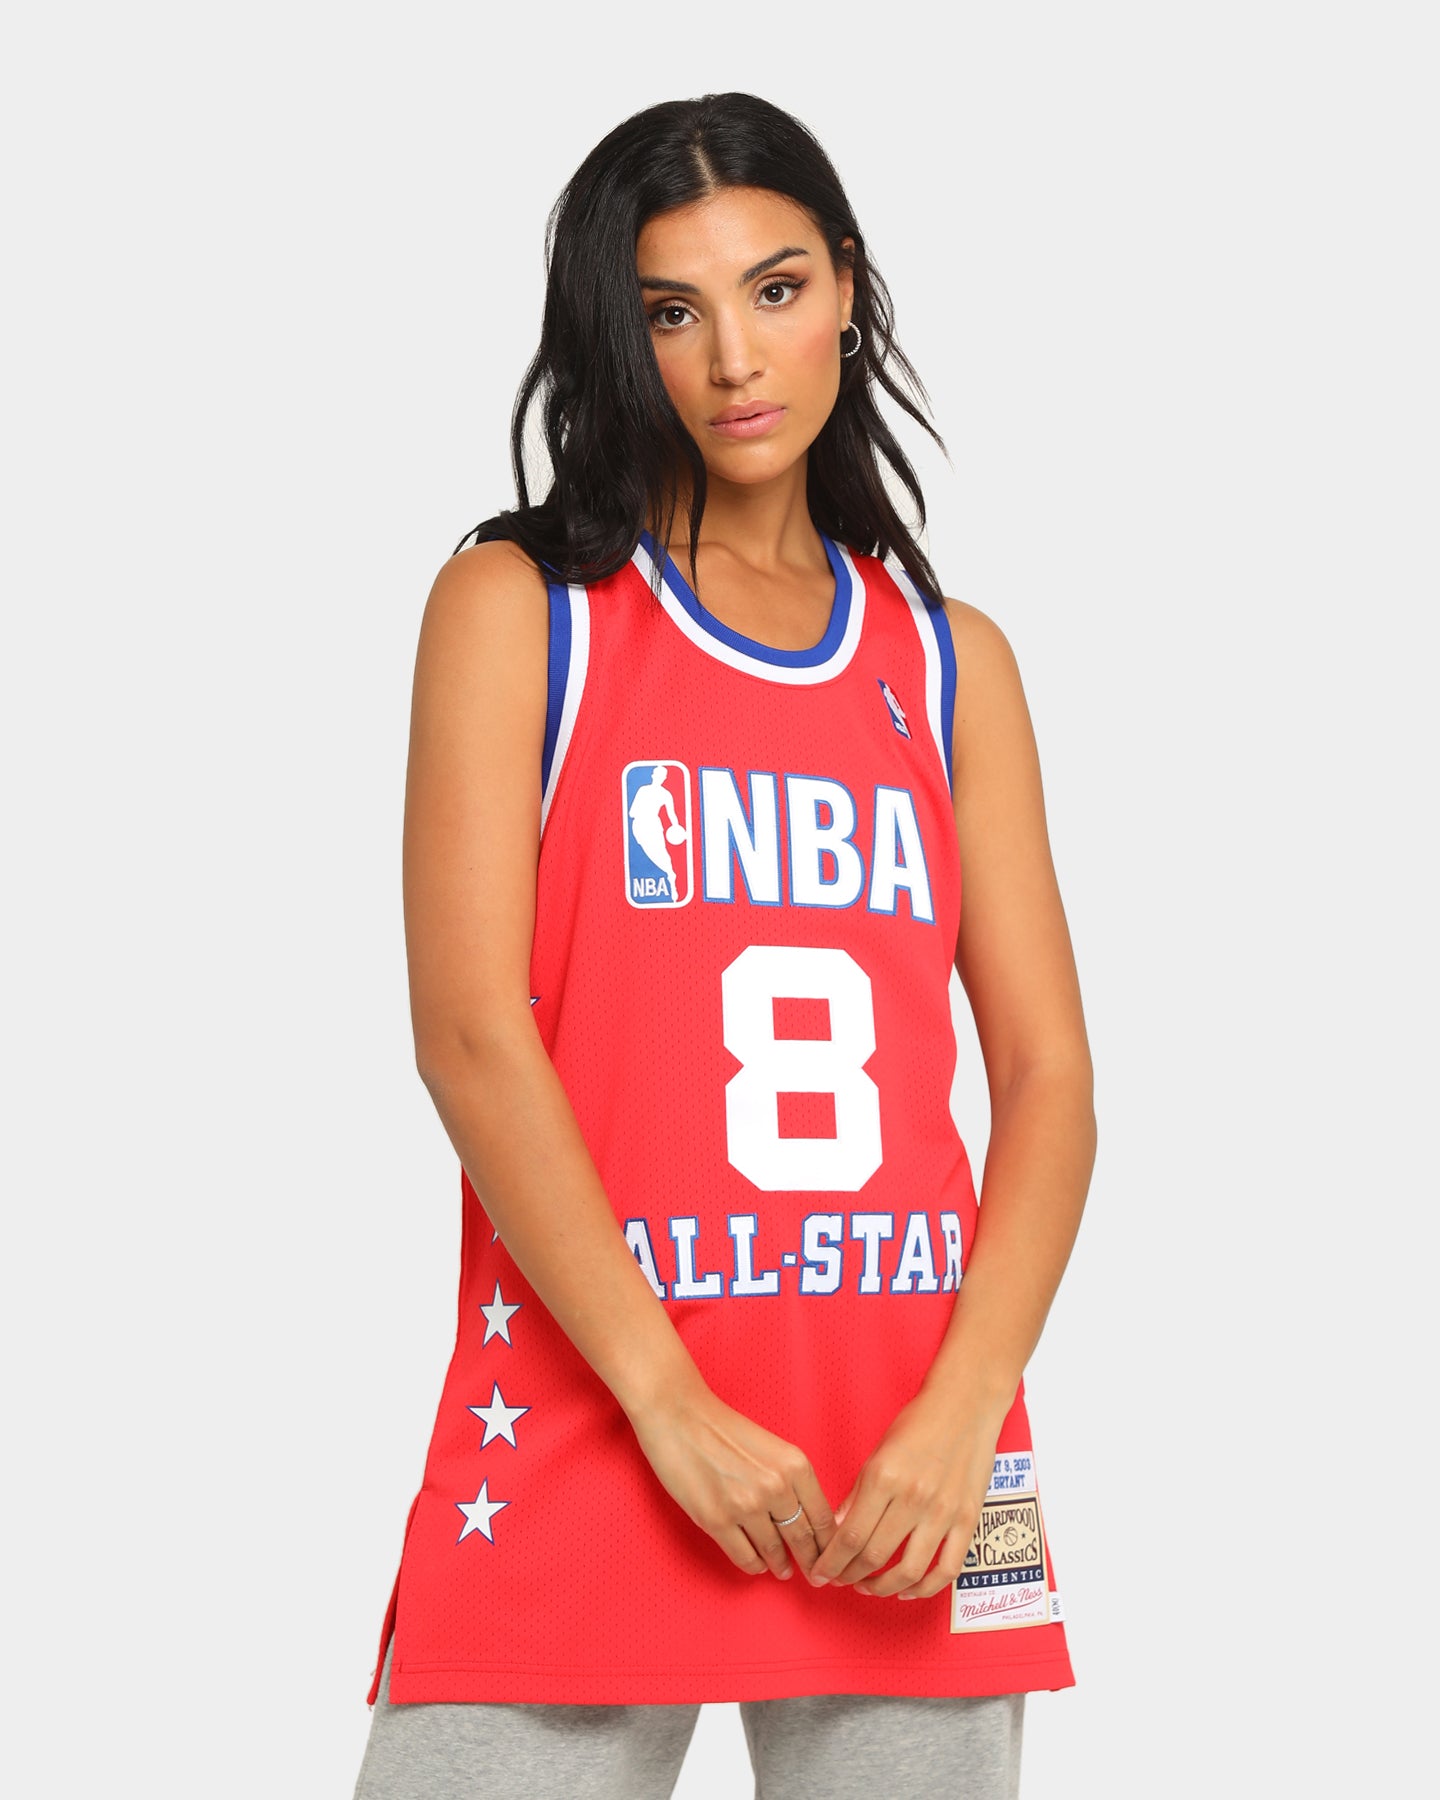 red all star jersey